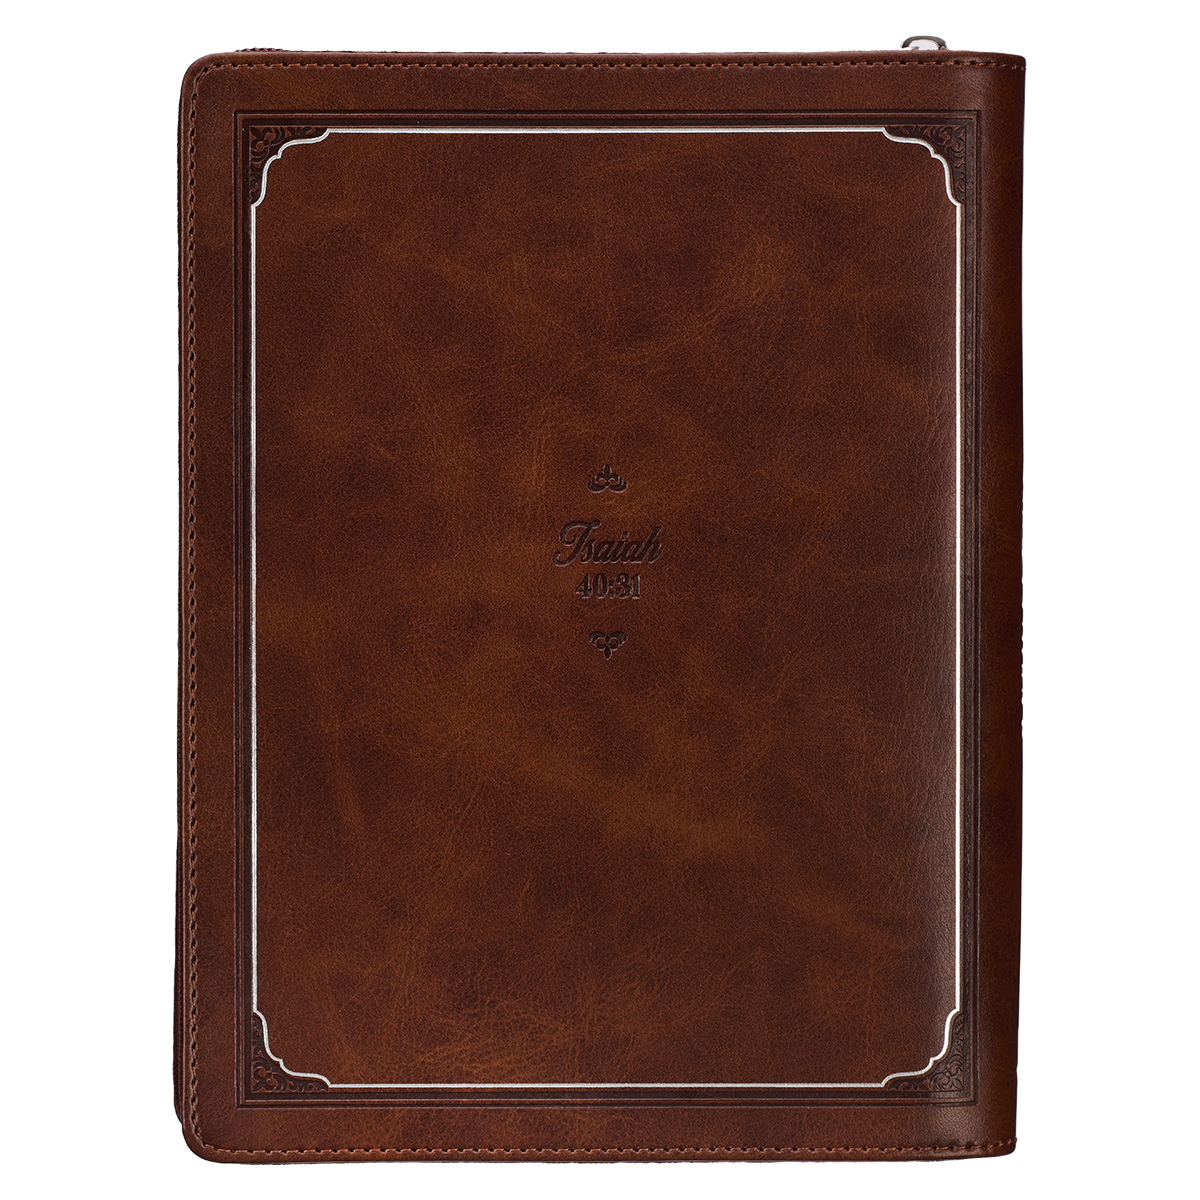 Christian Art Gifts 2024 12 Month Executive Vegan Leather Planner for Men & Women: Wings Like Eagles - Isaiah 40:31 Inspirational Bible Verse, Daily Personal Organizer w/Zipper Closure & Ribbon, Brown - image 2 of 6